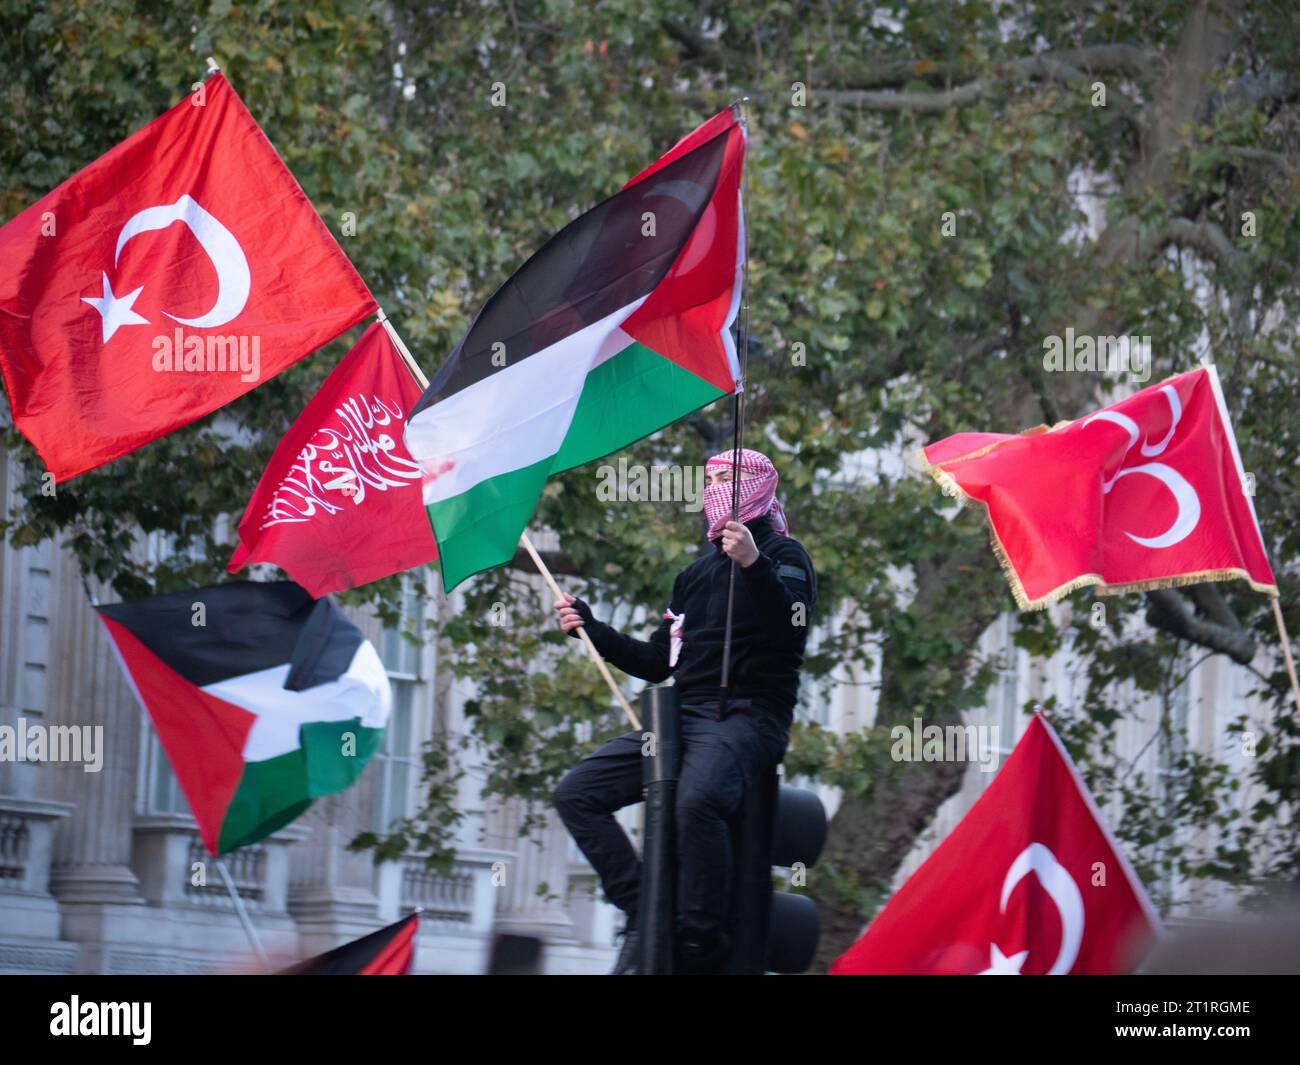 Protestor with Palestinian Flag and  Turkish Flag, flag of Turkey and flag of Palestine,  at Pro-Palestinian march in London, UK, at the Palestine Solidarity Campaign demonstration, march was organised to protest about the Israel Palestine confict over the Gaza Strip Stock Photo